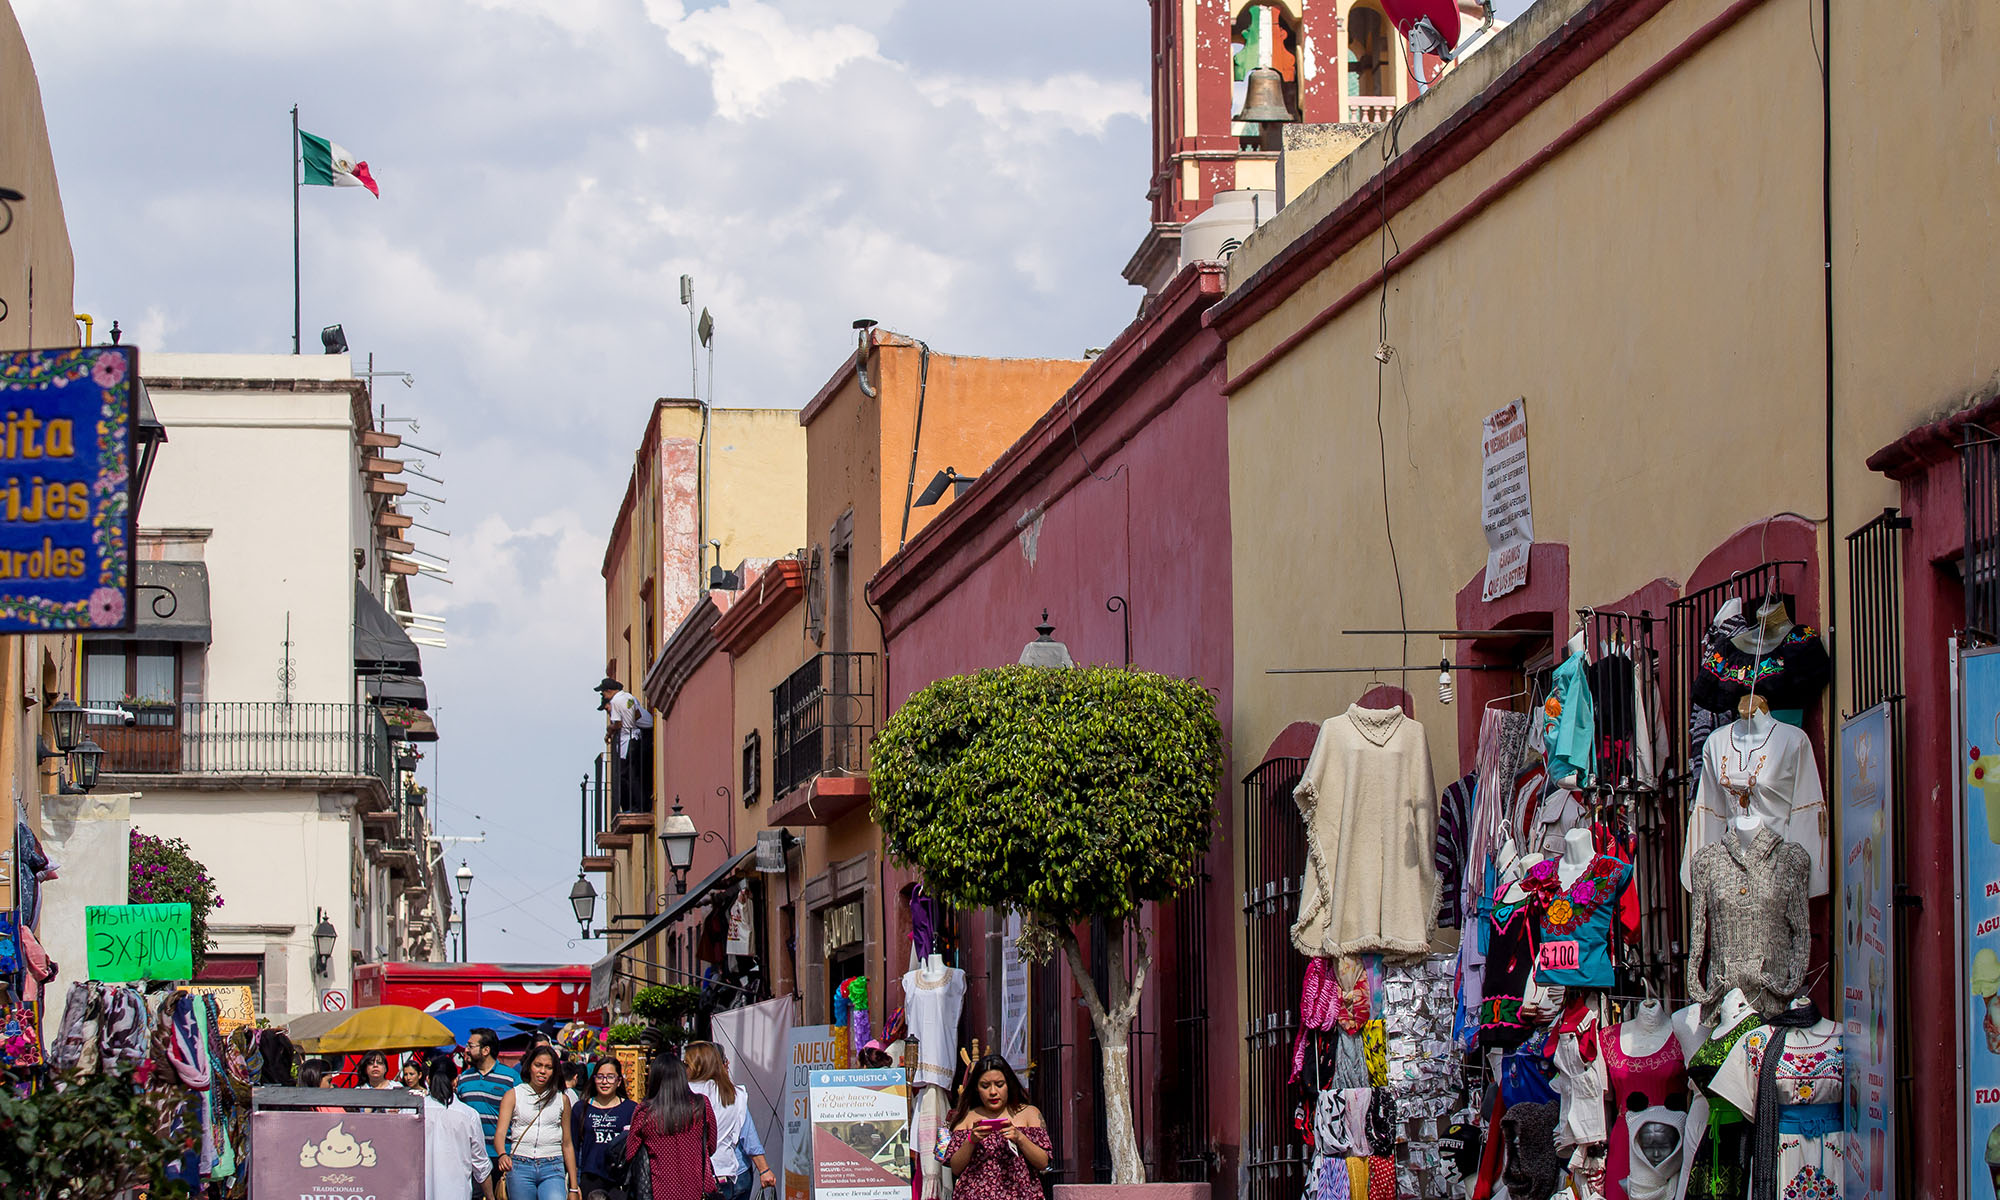 Tourists and locals visit shops and restaurants nestled in old Spanish-style buildings, which are one of the unique characteristics of downtown Santiago de Querétaro in Mexico.